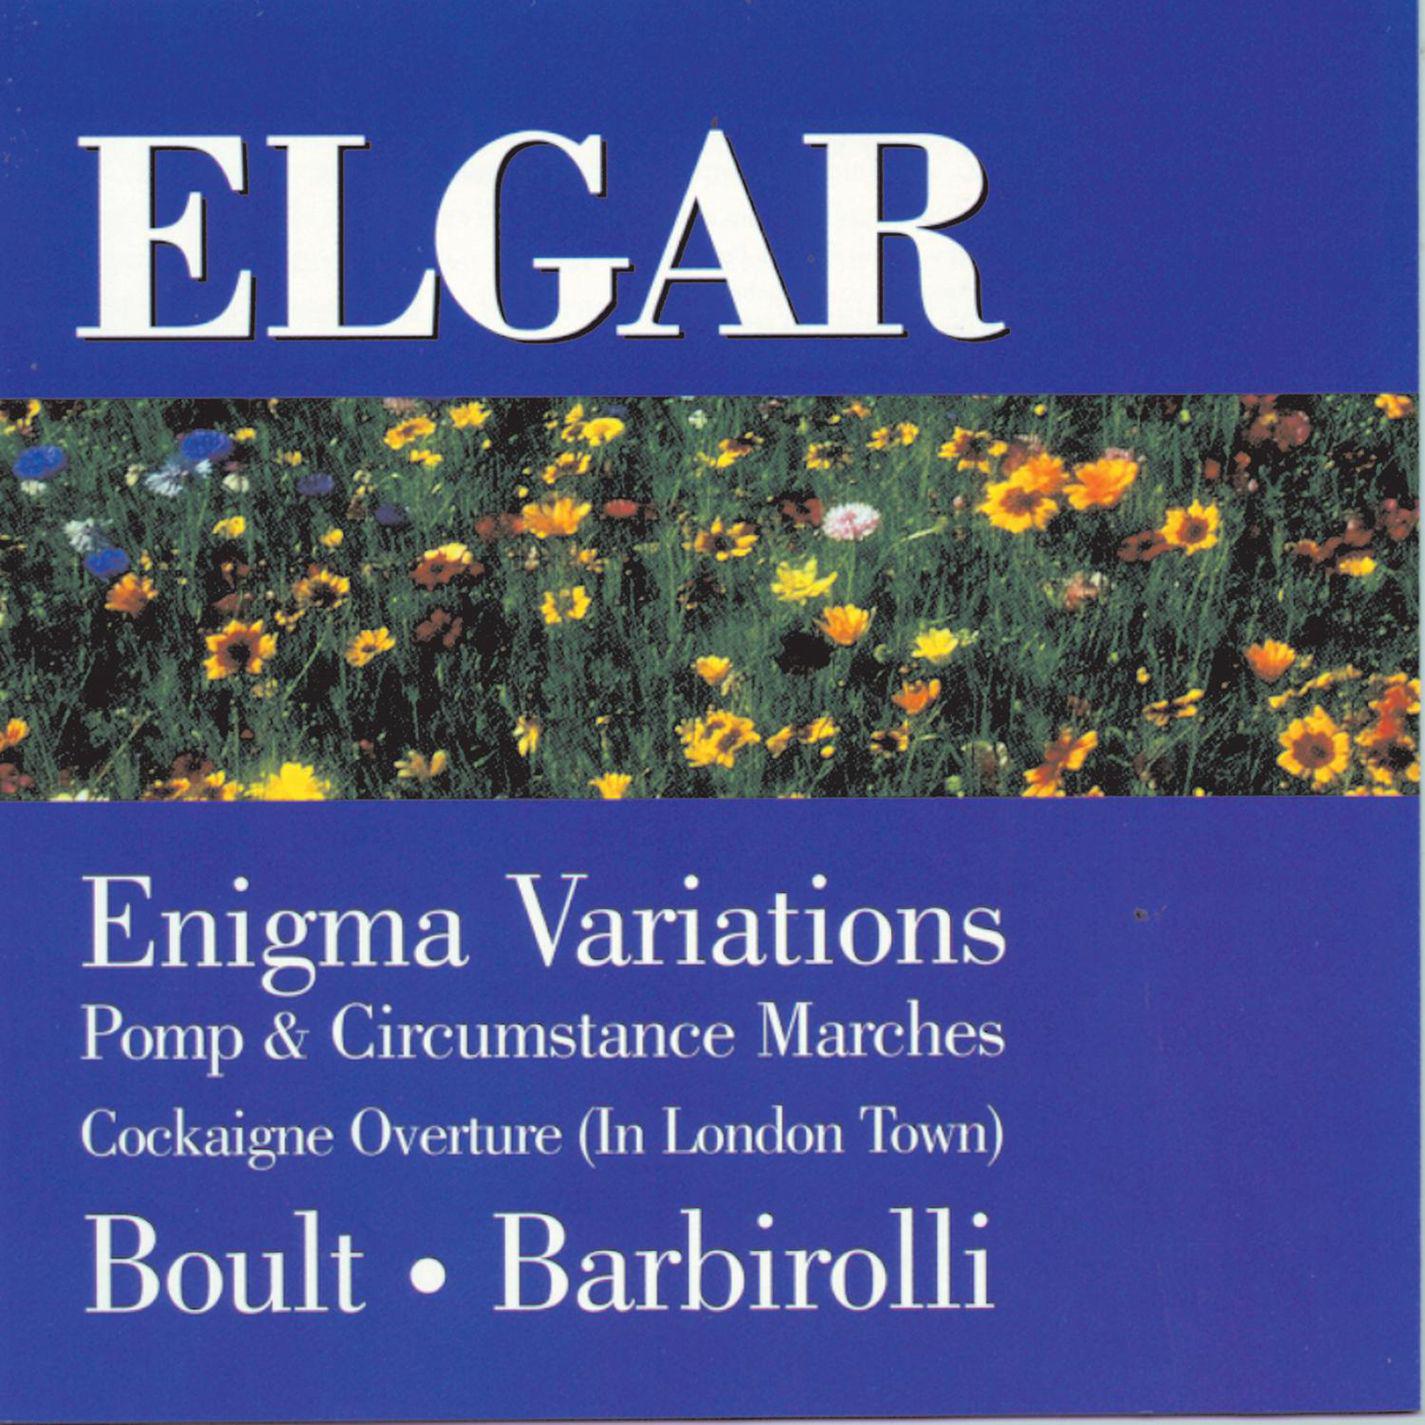 Variations on an Original Theme, Op. 36 "Enigma":Variation I. C.A.E.